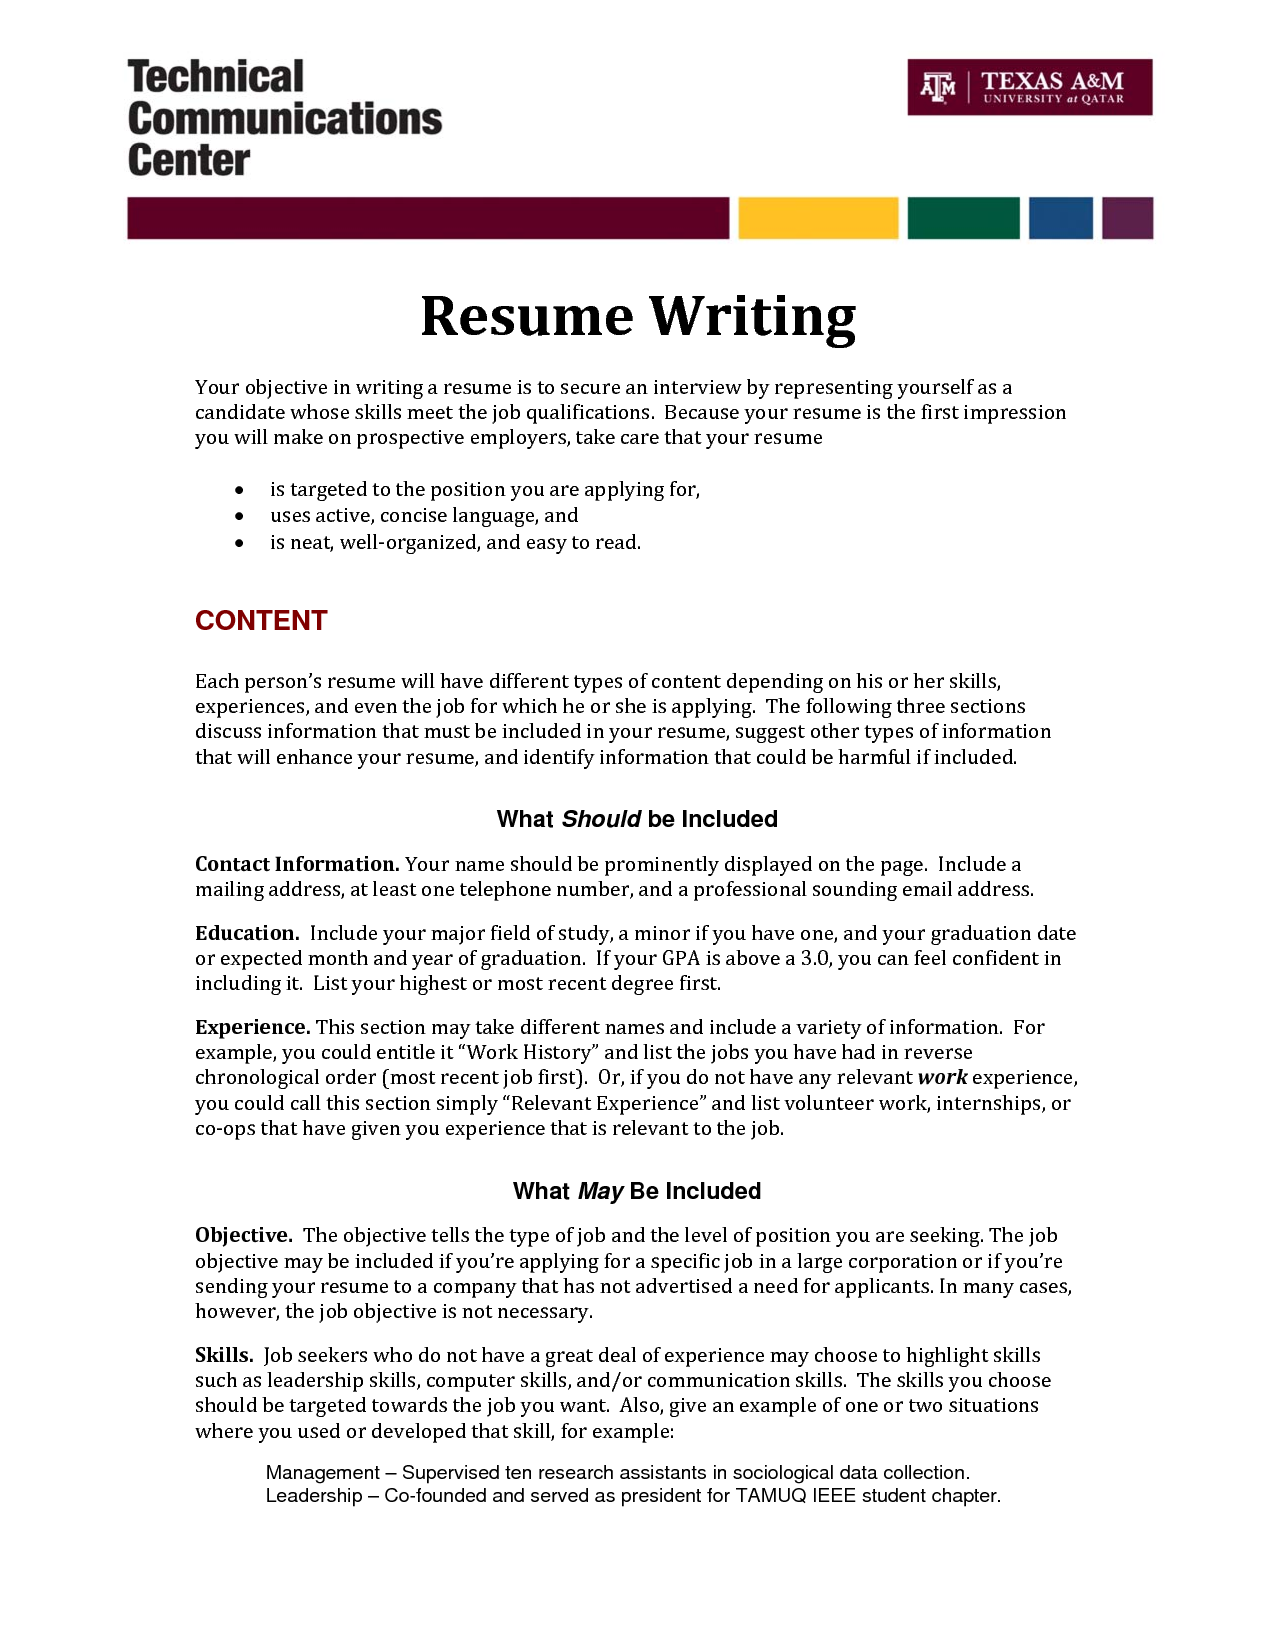 How Do You Write A Resume For A First Job? : Best ...